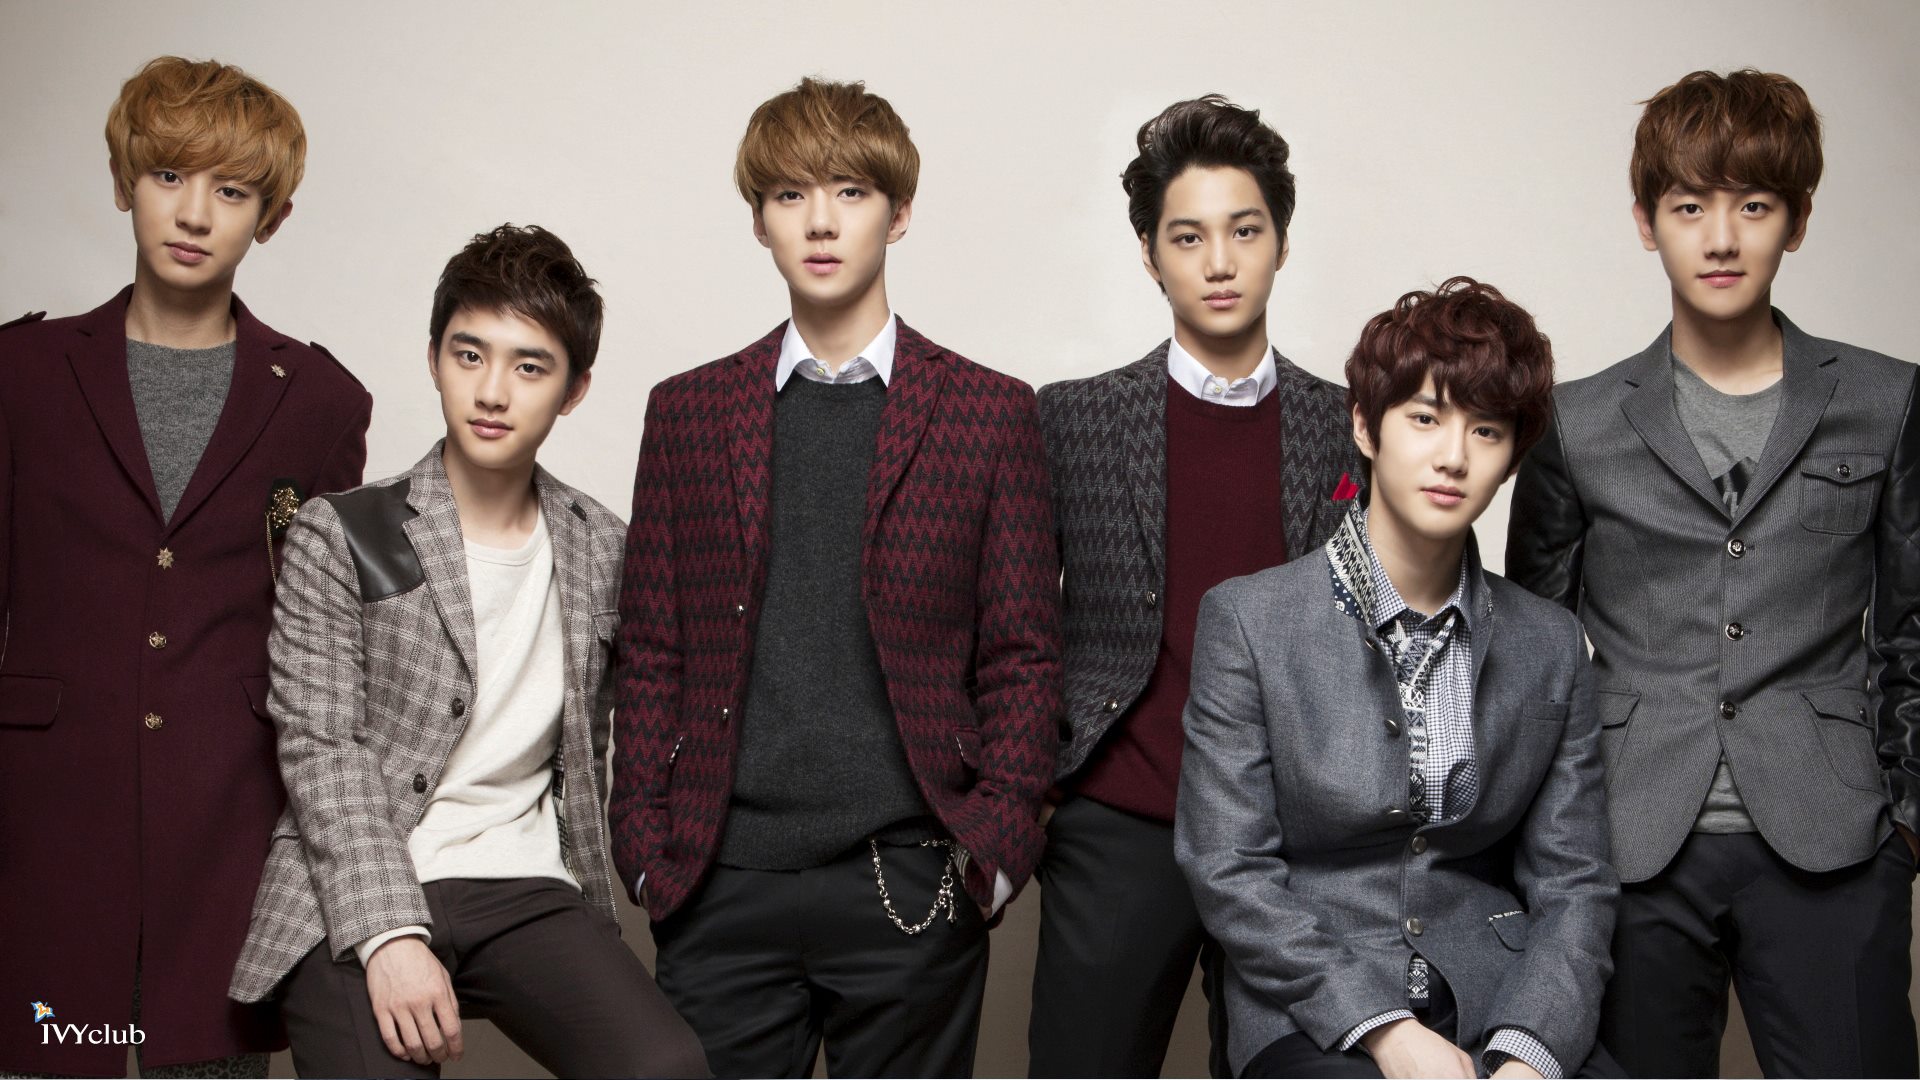 exo wallpaper hd,social group,suit,hairstyle,youth,formal wear